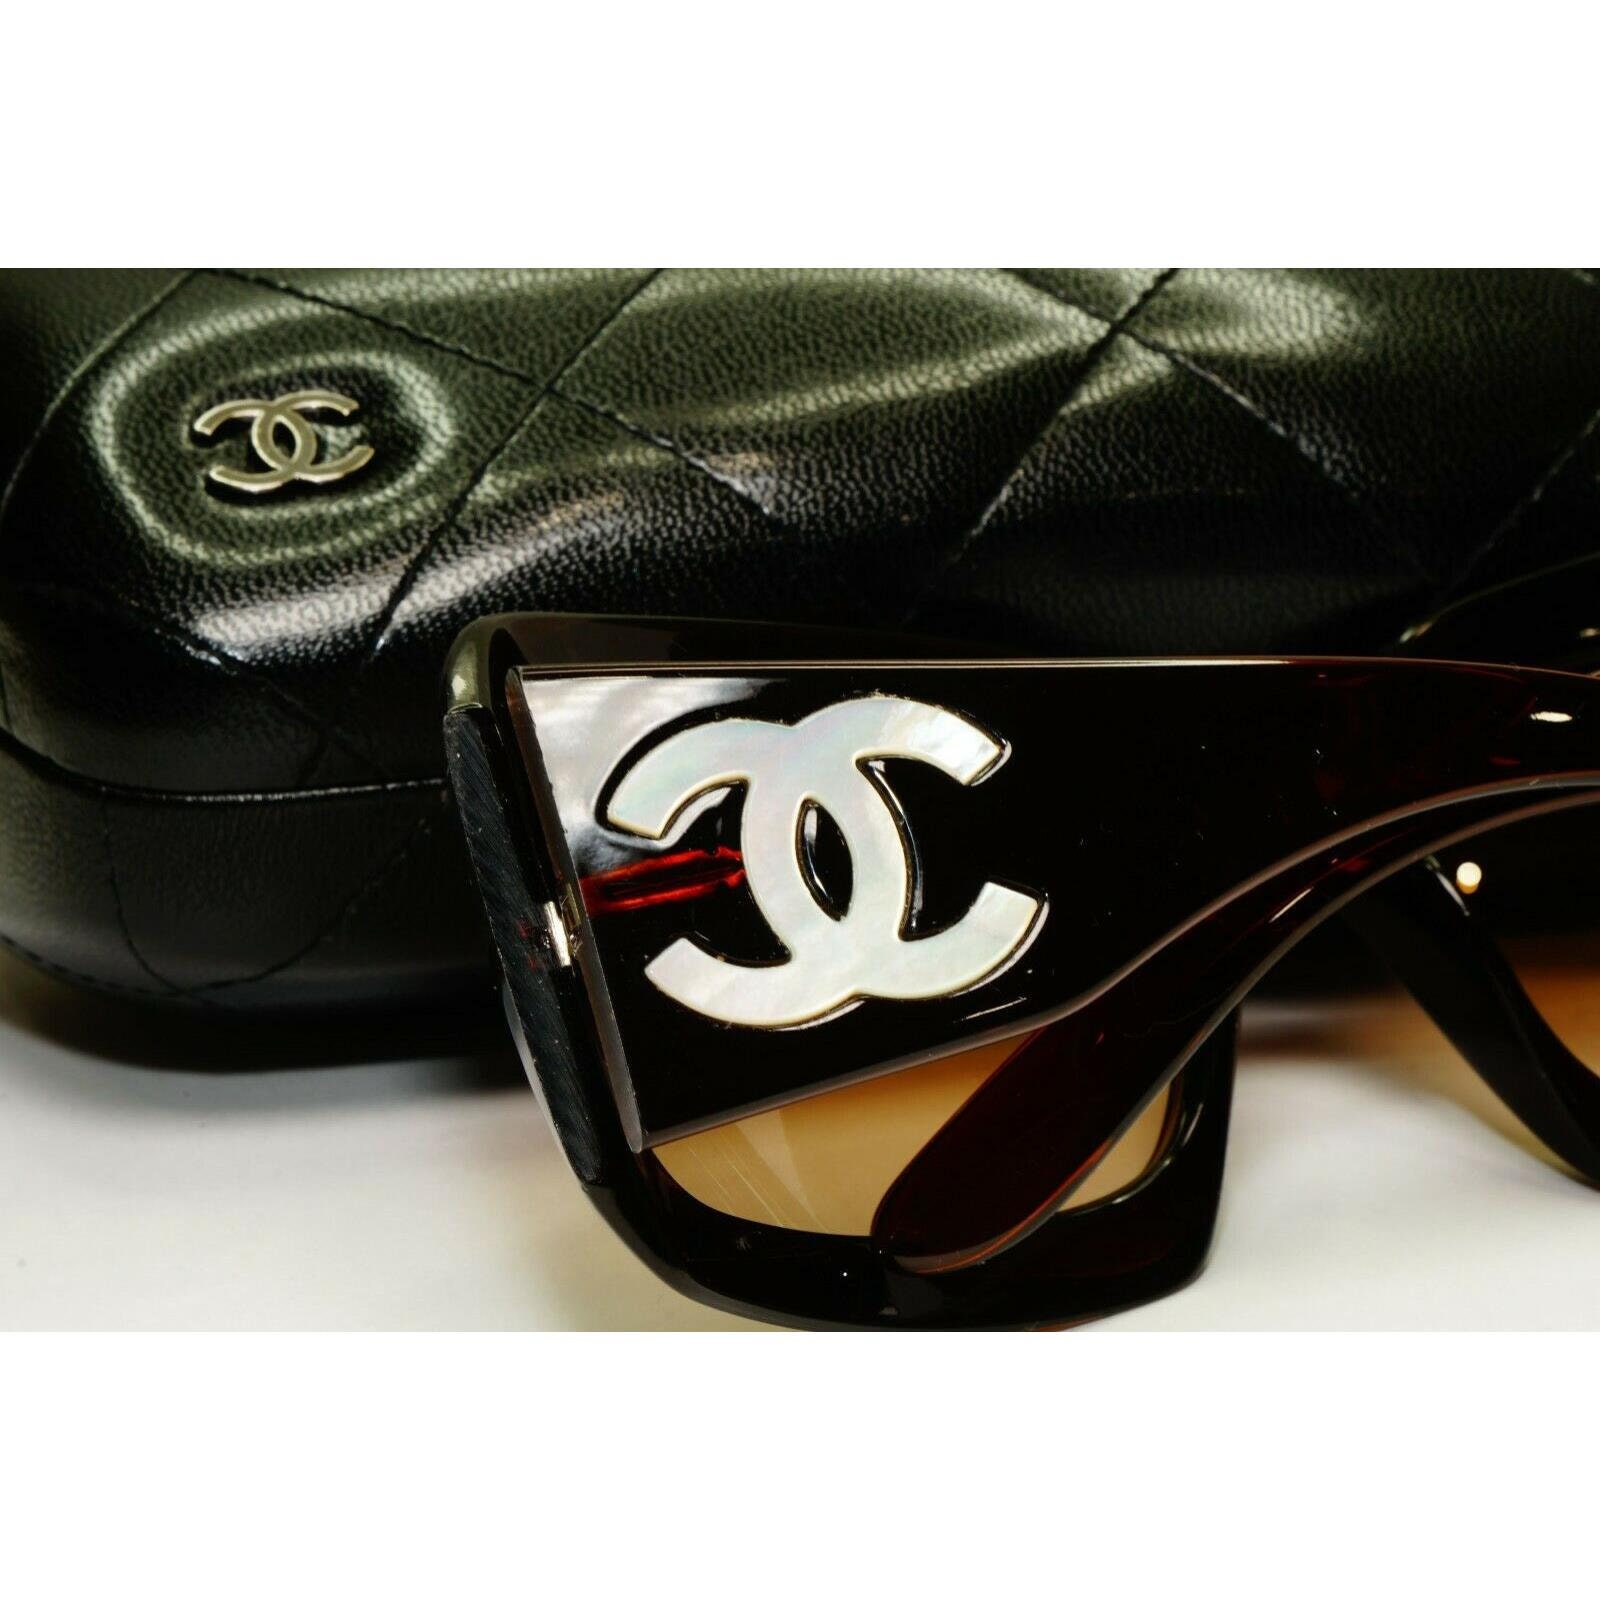 Chanel Mother of Pearl Vintage Sunglasses Brown Women Square 